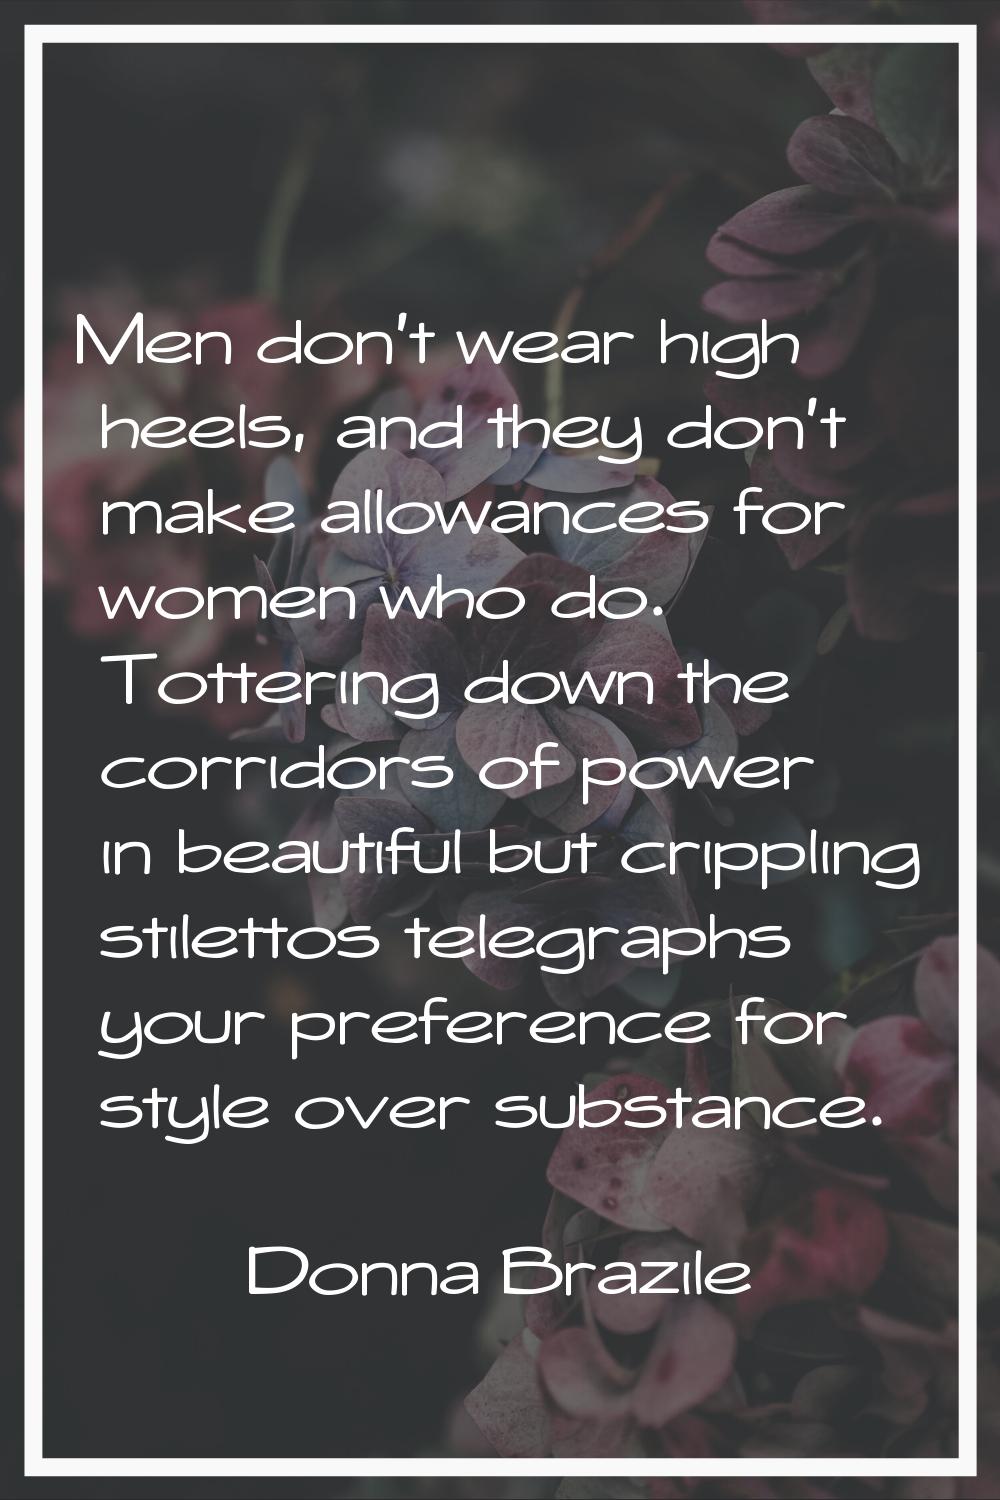 Men don't wear high heels, and they don't make allowances for women who do. Tottering down the corr